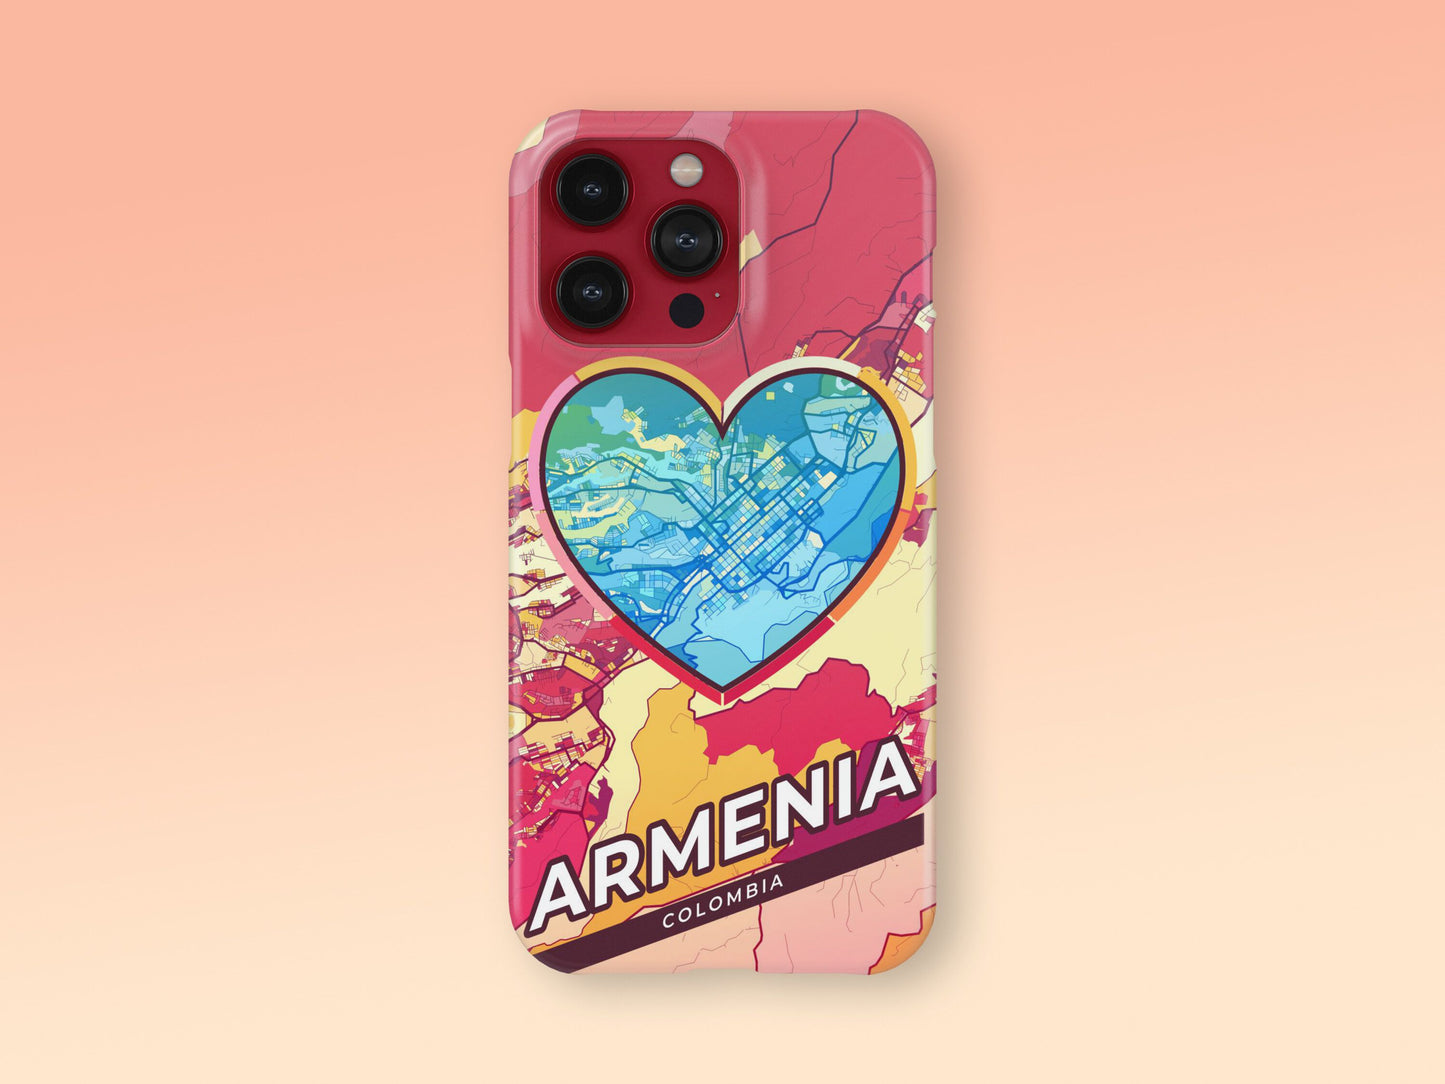 Armenia Colombia slim phone case with colorful icon. Birthday, wedding or housewarming gift. Couple match cases. 2